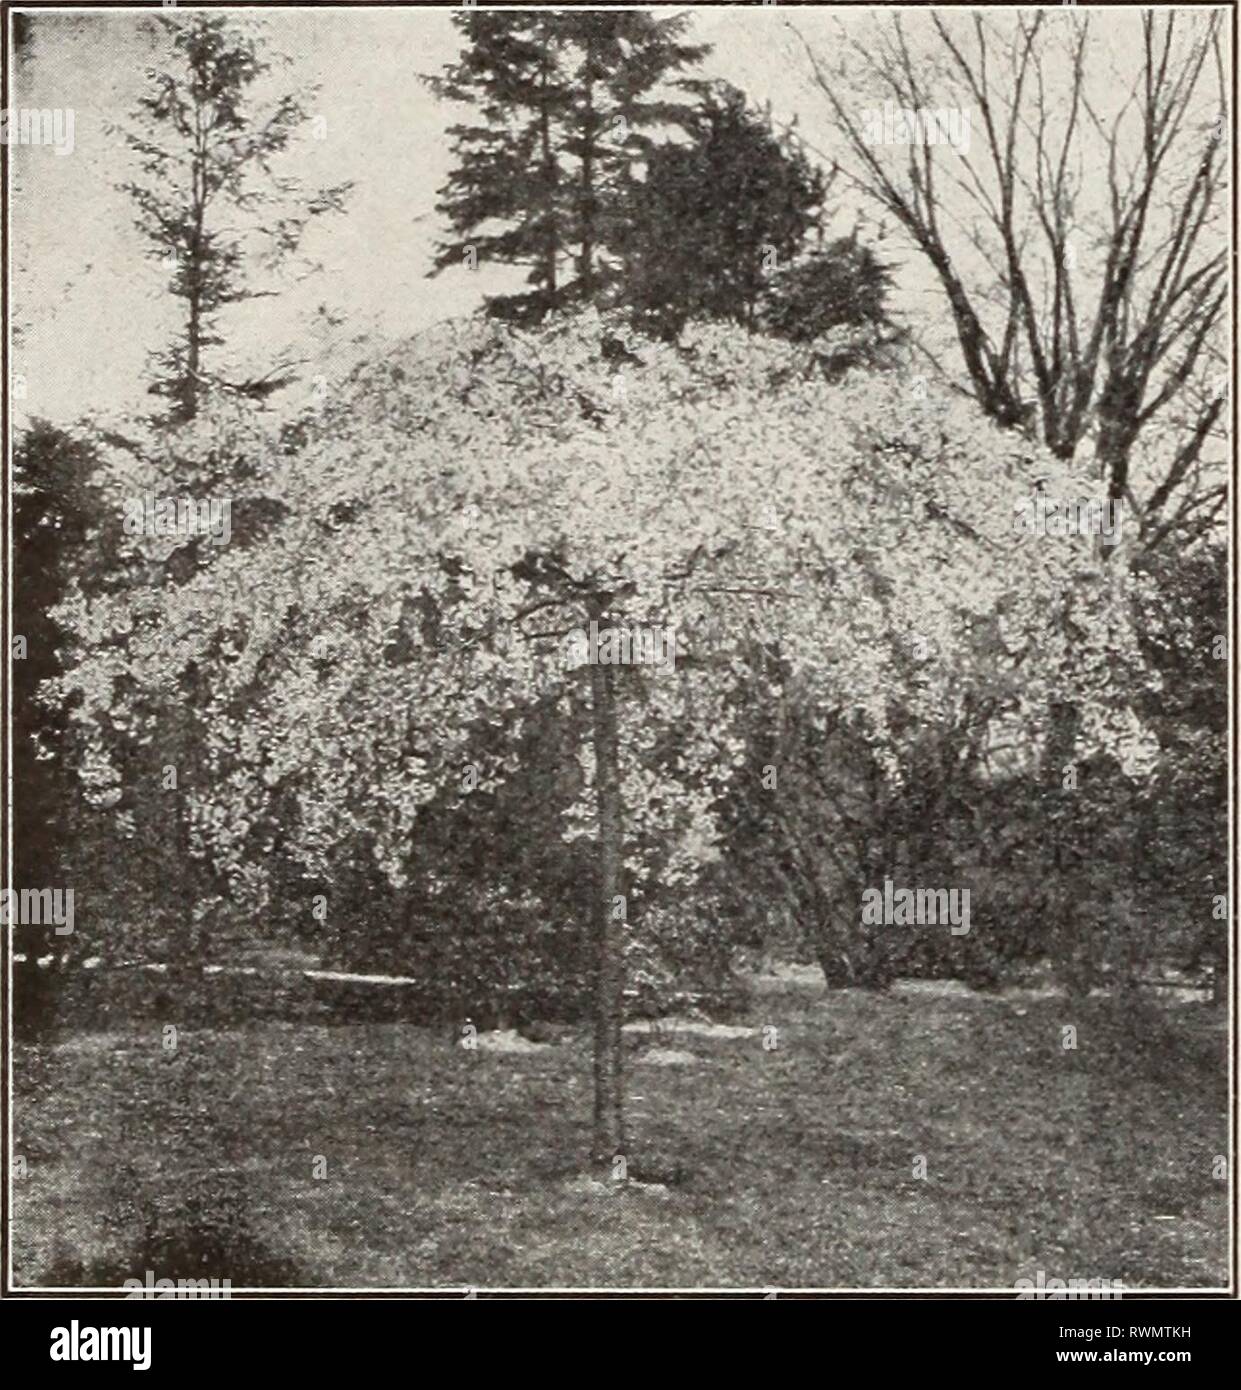 Ellwanger & Barry Mt Hope Ellwanger & Barry Mt Hope Nurseries 1916 ellwangerbarrymt1916moun Year: 1916  CATALPA The Catalpas flower in July, when few trees are in bloom. Their blossoms are large, verj^ showT, and quite fragrant. Leaves large, heart-shaped, and yellowish green. They are all effective, tropical-looking lawn trees. C. Bungei. Chit:se Cataxpa. D. A species from China. Foliage large and glossy; a shy- bloomer. Top-grafted on tall stems it forms a perfect umbrella shaped head and makes an effective tree for formal gardens. $1.50 each; 10 for $12.30. C. Kaempferi. Jap ax Catalpa. B. Stock Photo